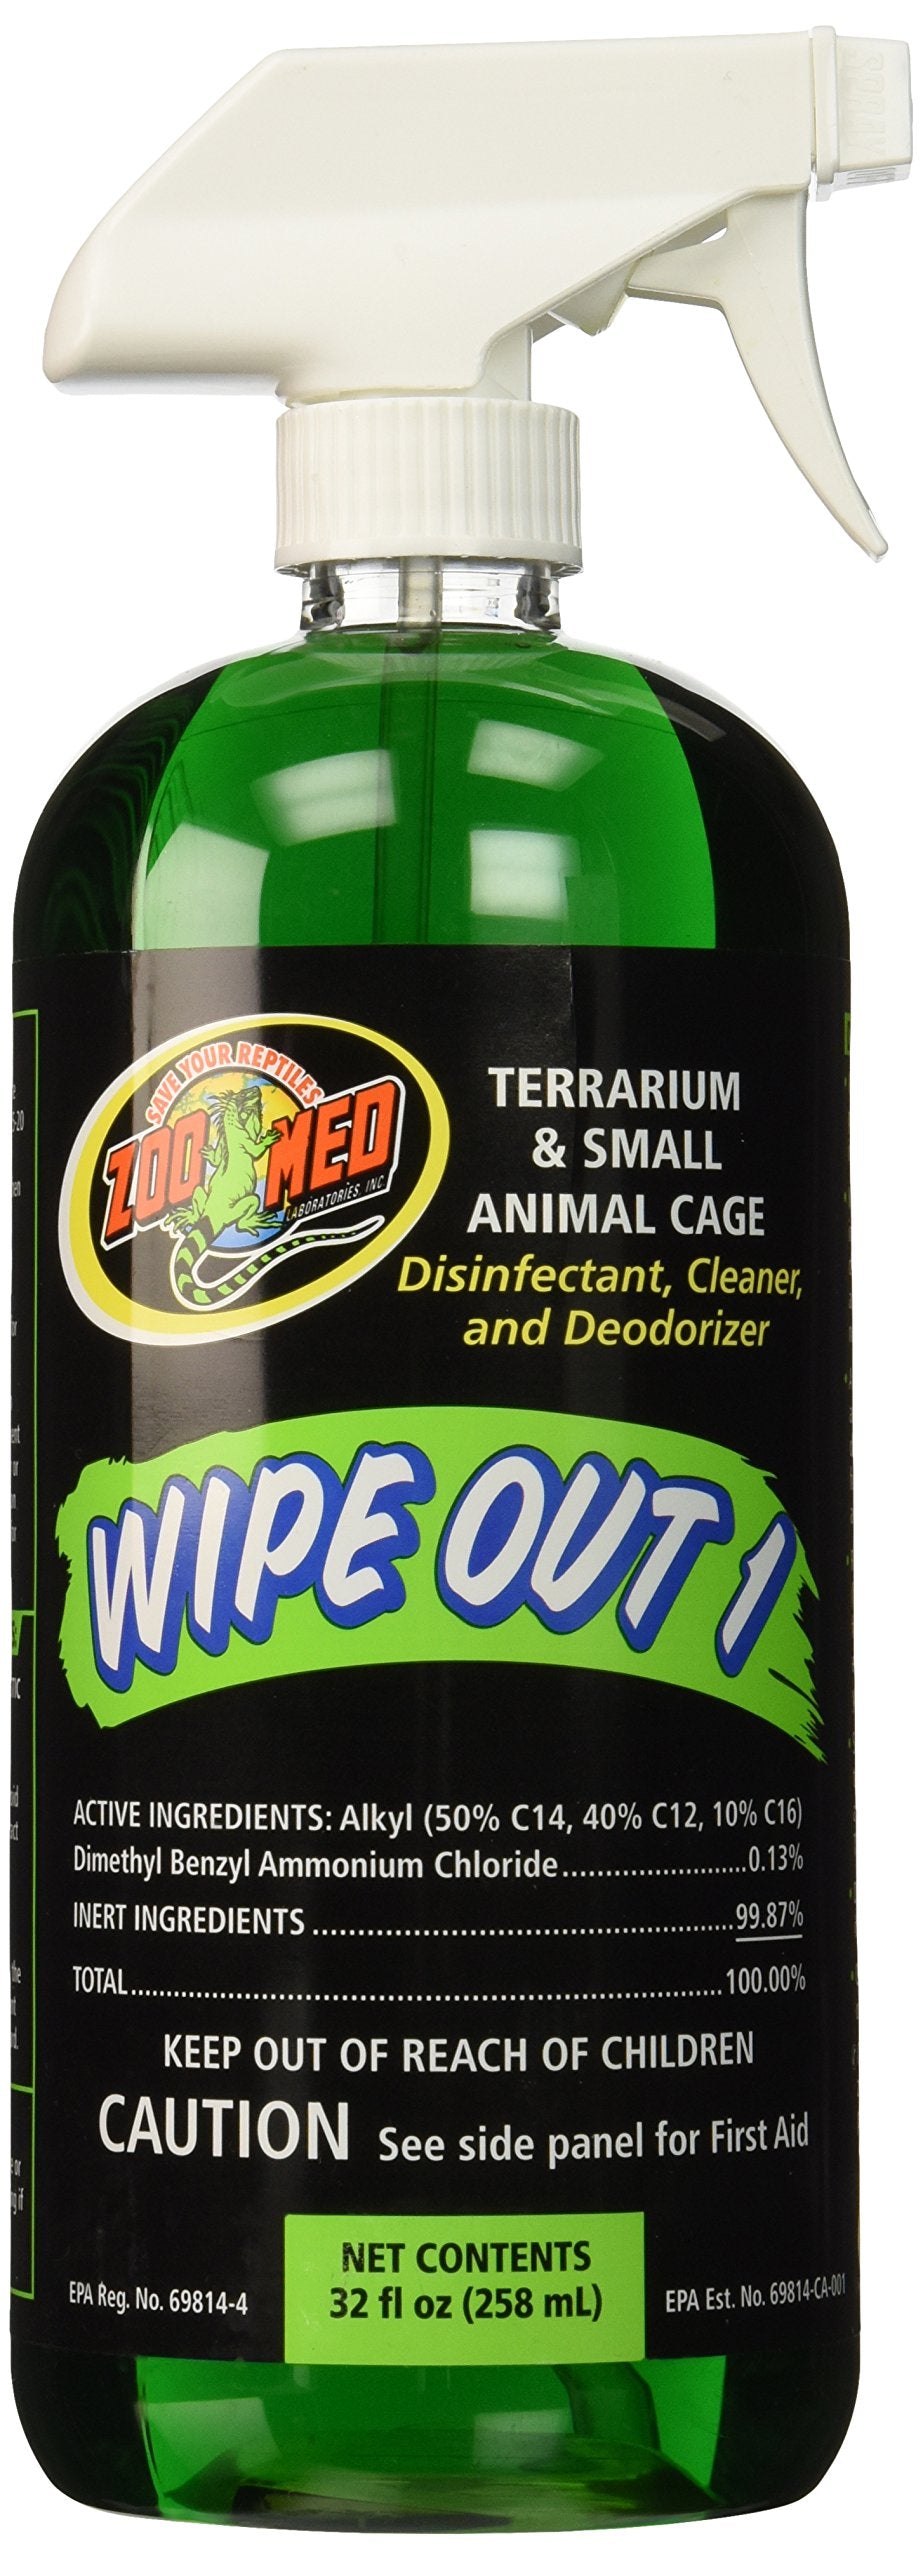 Zoo Med Laboratories Wipeout All-Natural Terrarium and Small Animal Disinfectant Cleane...